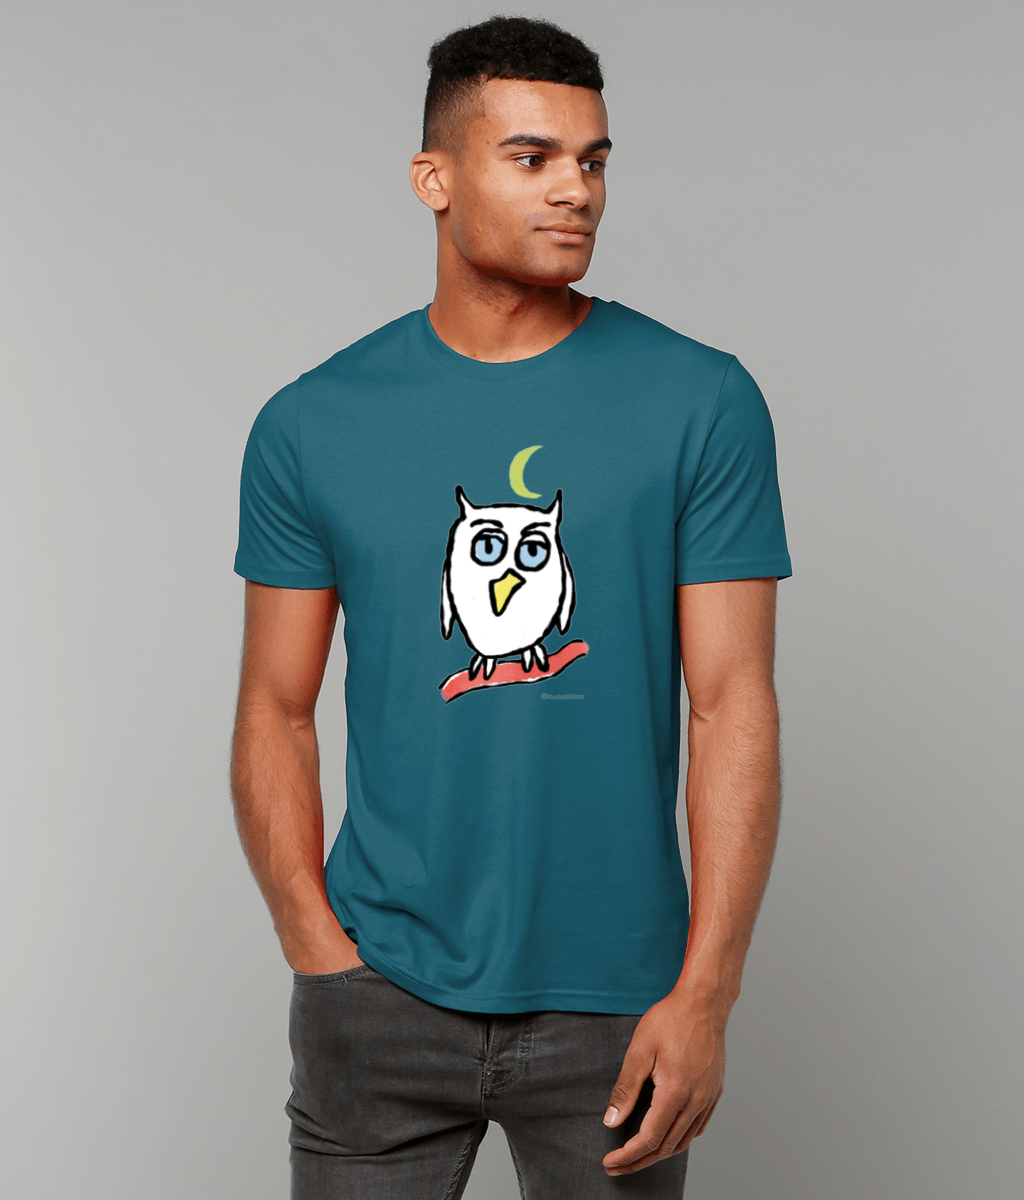 Owl T-shirt - Young man wearing a night blue colour vegan cotton Night Owl T-shirt design by Hector and Bone